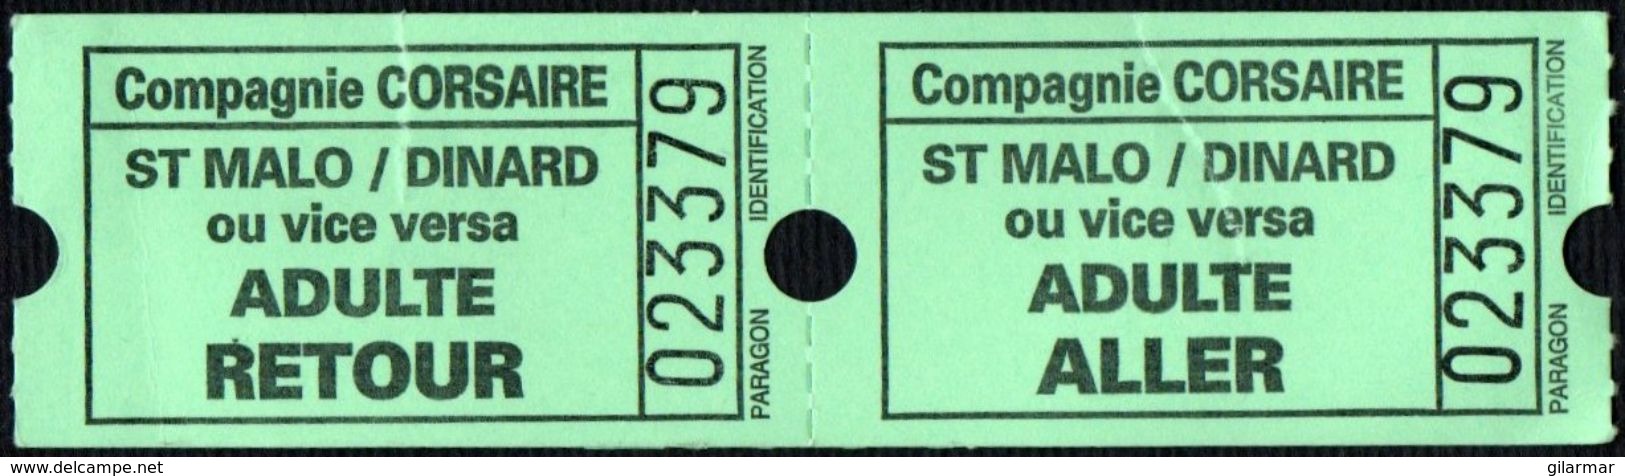 SHIPS - COMPAGNIE CORSAIRE - TICKET A / R ADULTE - SAINT MALO / DINARD - USED - Europa